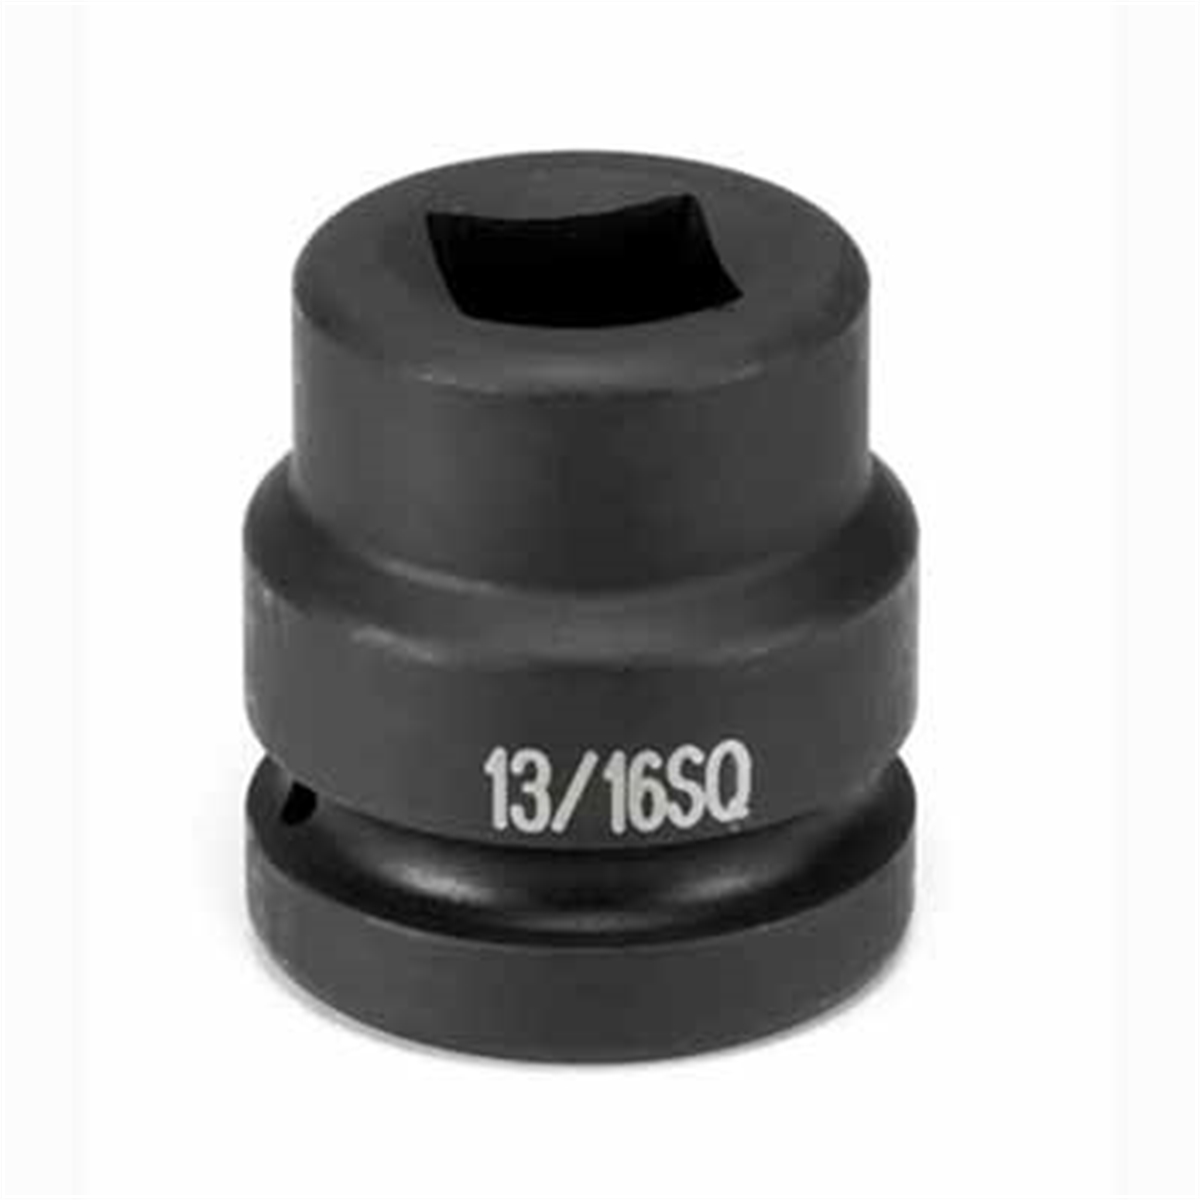 19mm 4-Point (Square) Standard Length 1" Drive Impact Socket